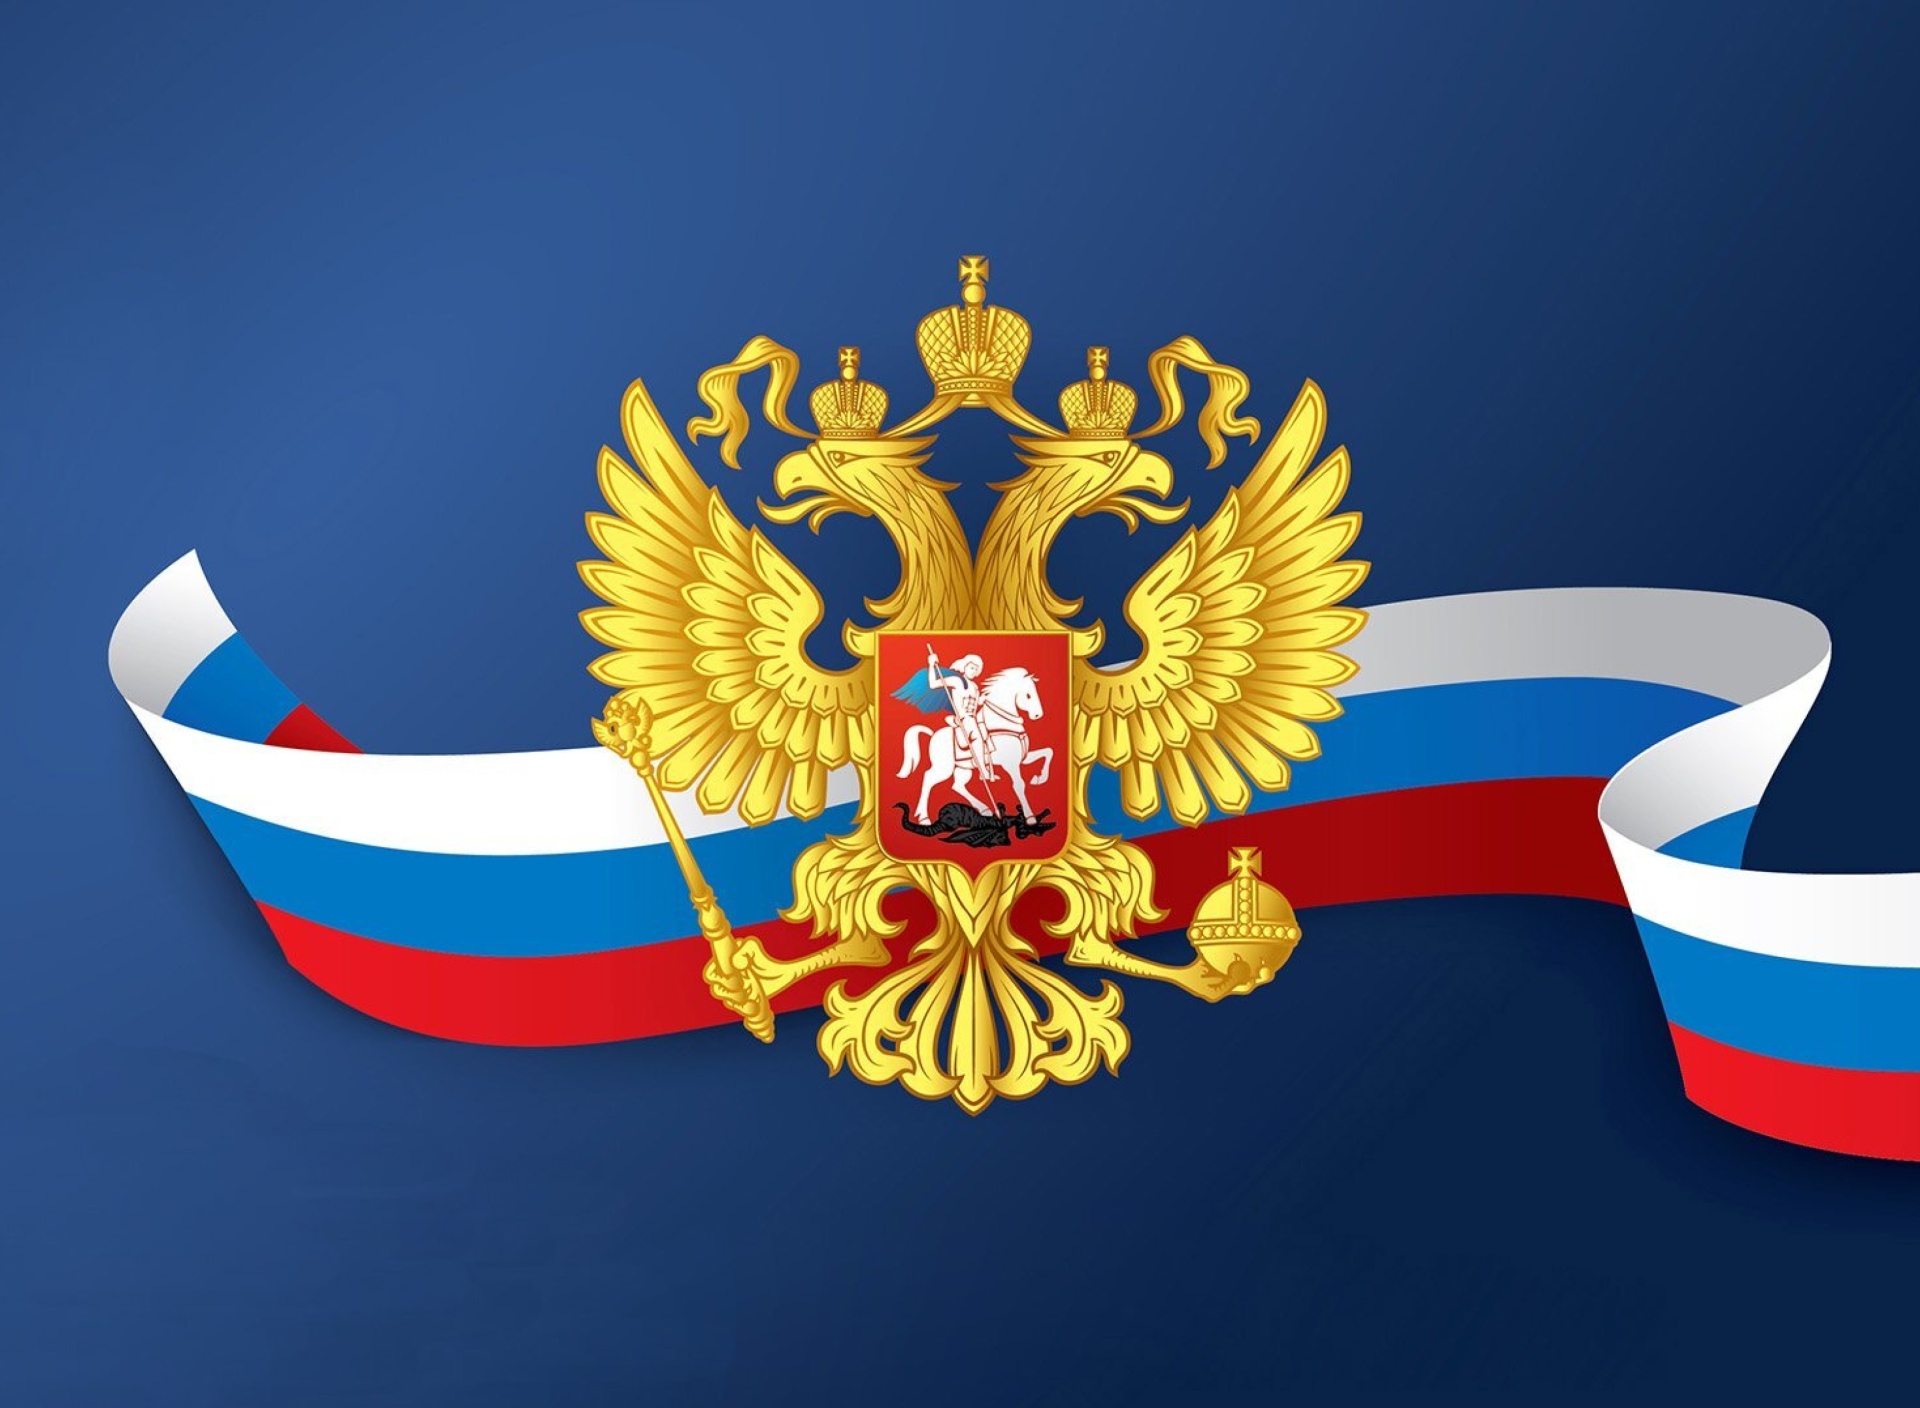 Russian coat of arms and flag screenshot #1 1920x1408